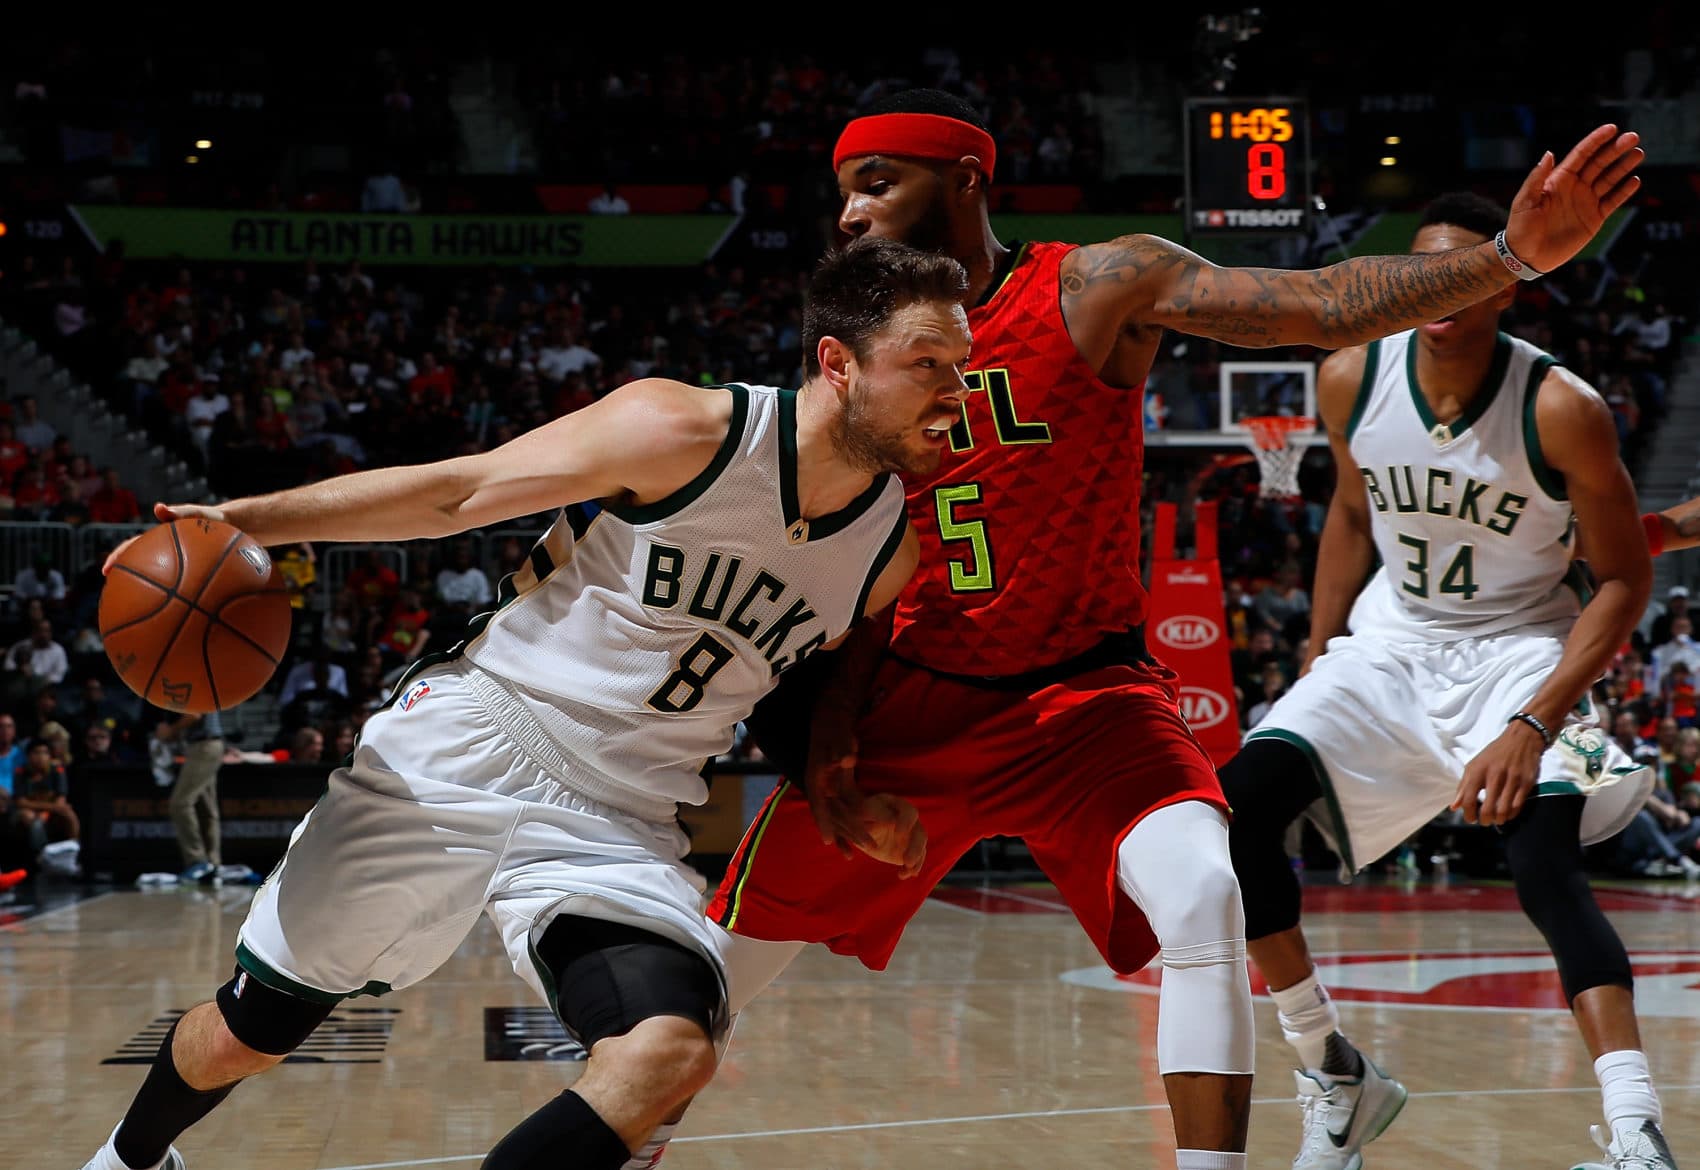 Matthew Dellavedova playing for the Bucks in 2017. (Kevin C. Cox/Getty Images)